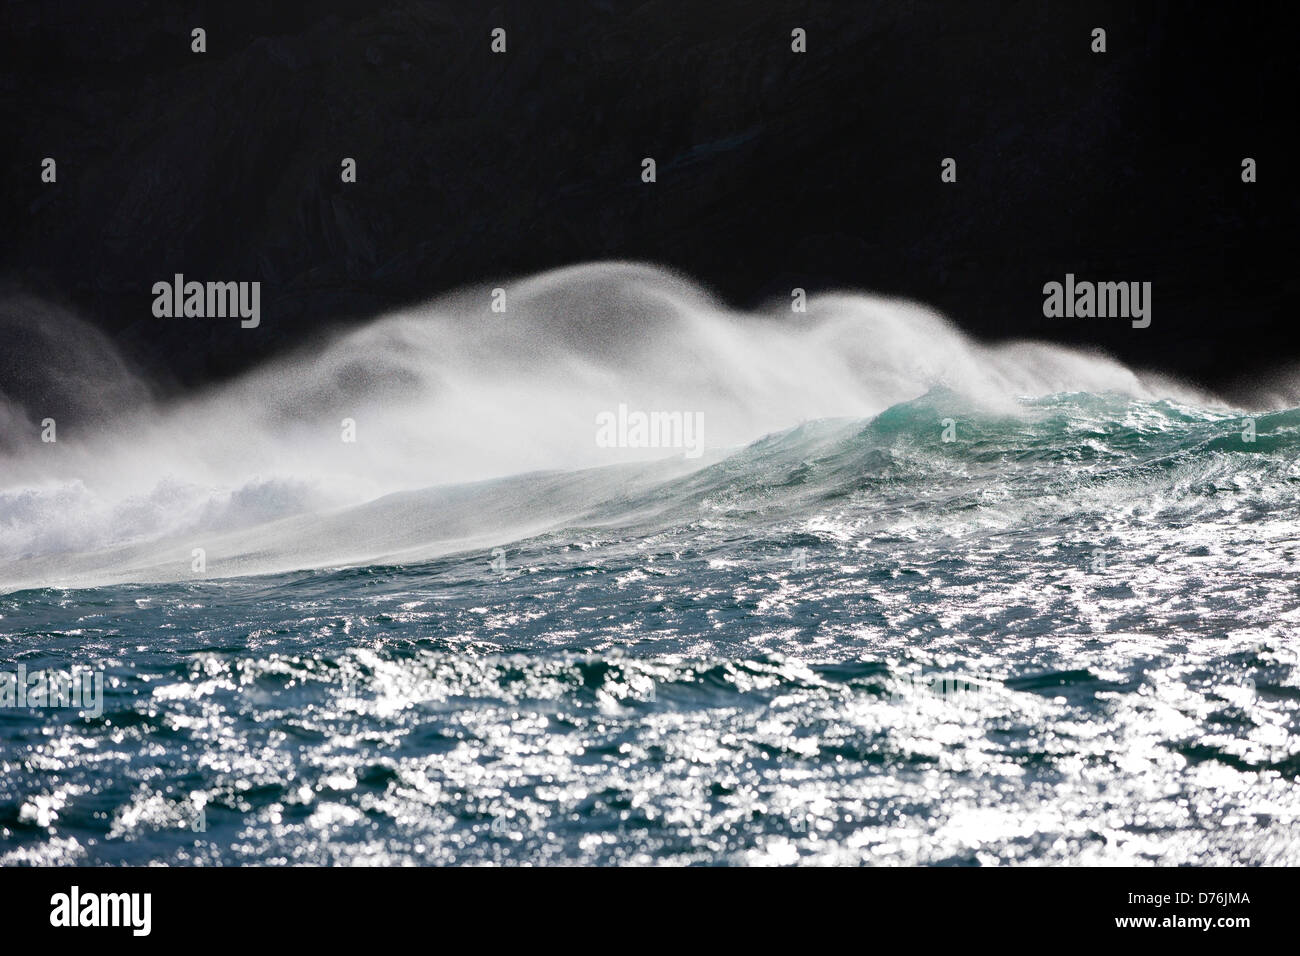 Surge of Waves, Indian Ocean, Wild Coast, South Africa Stock Photo